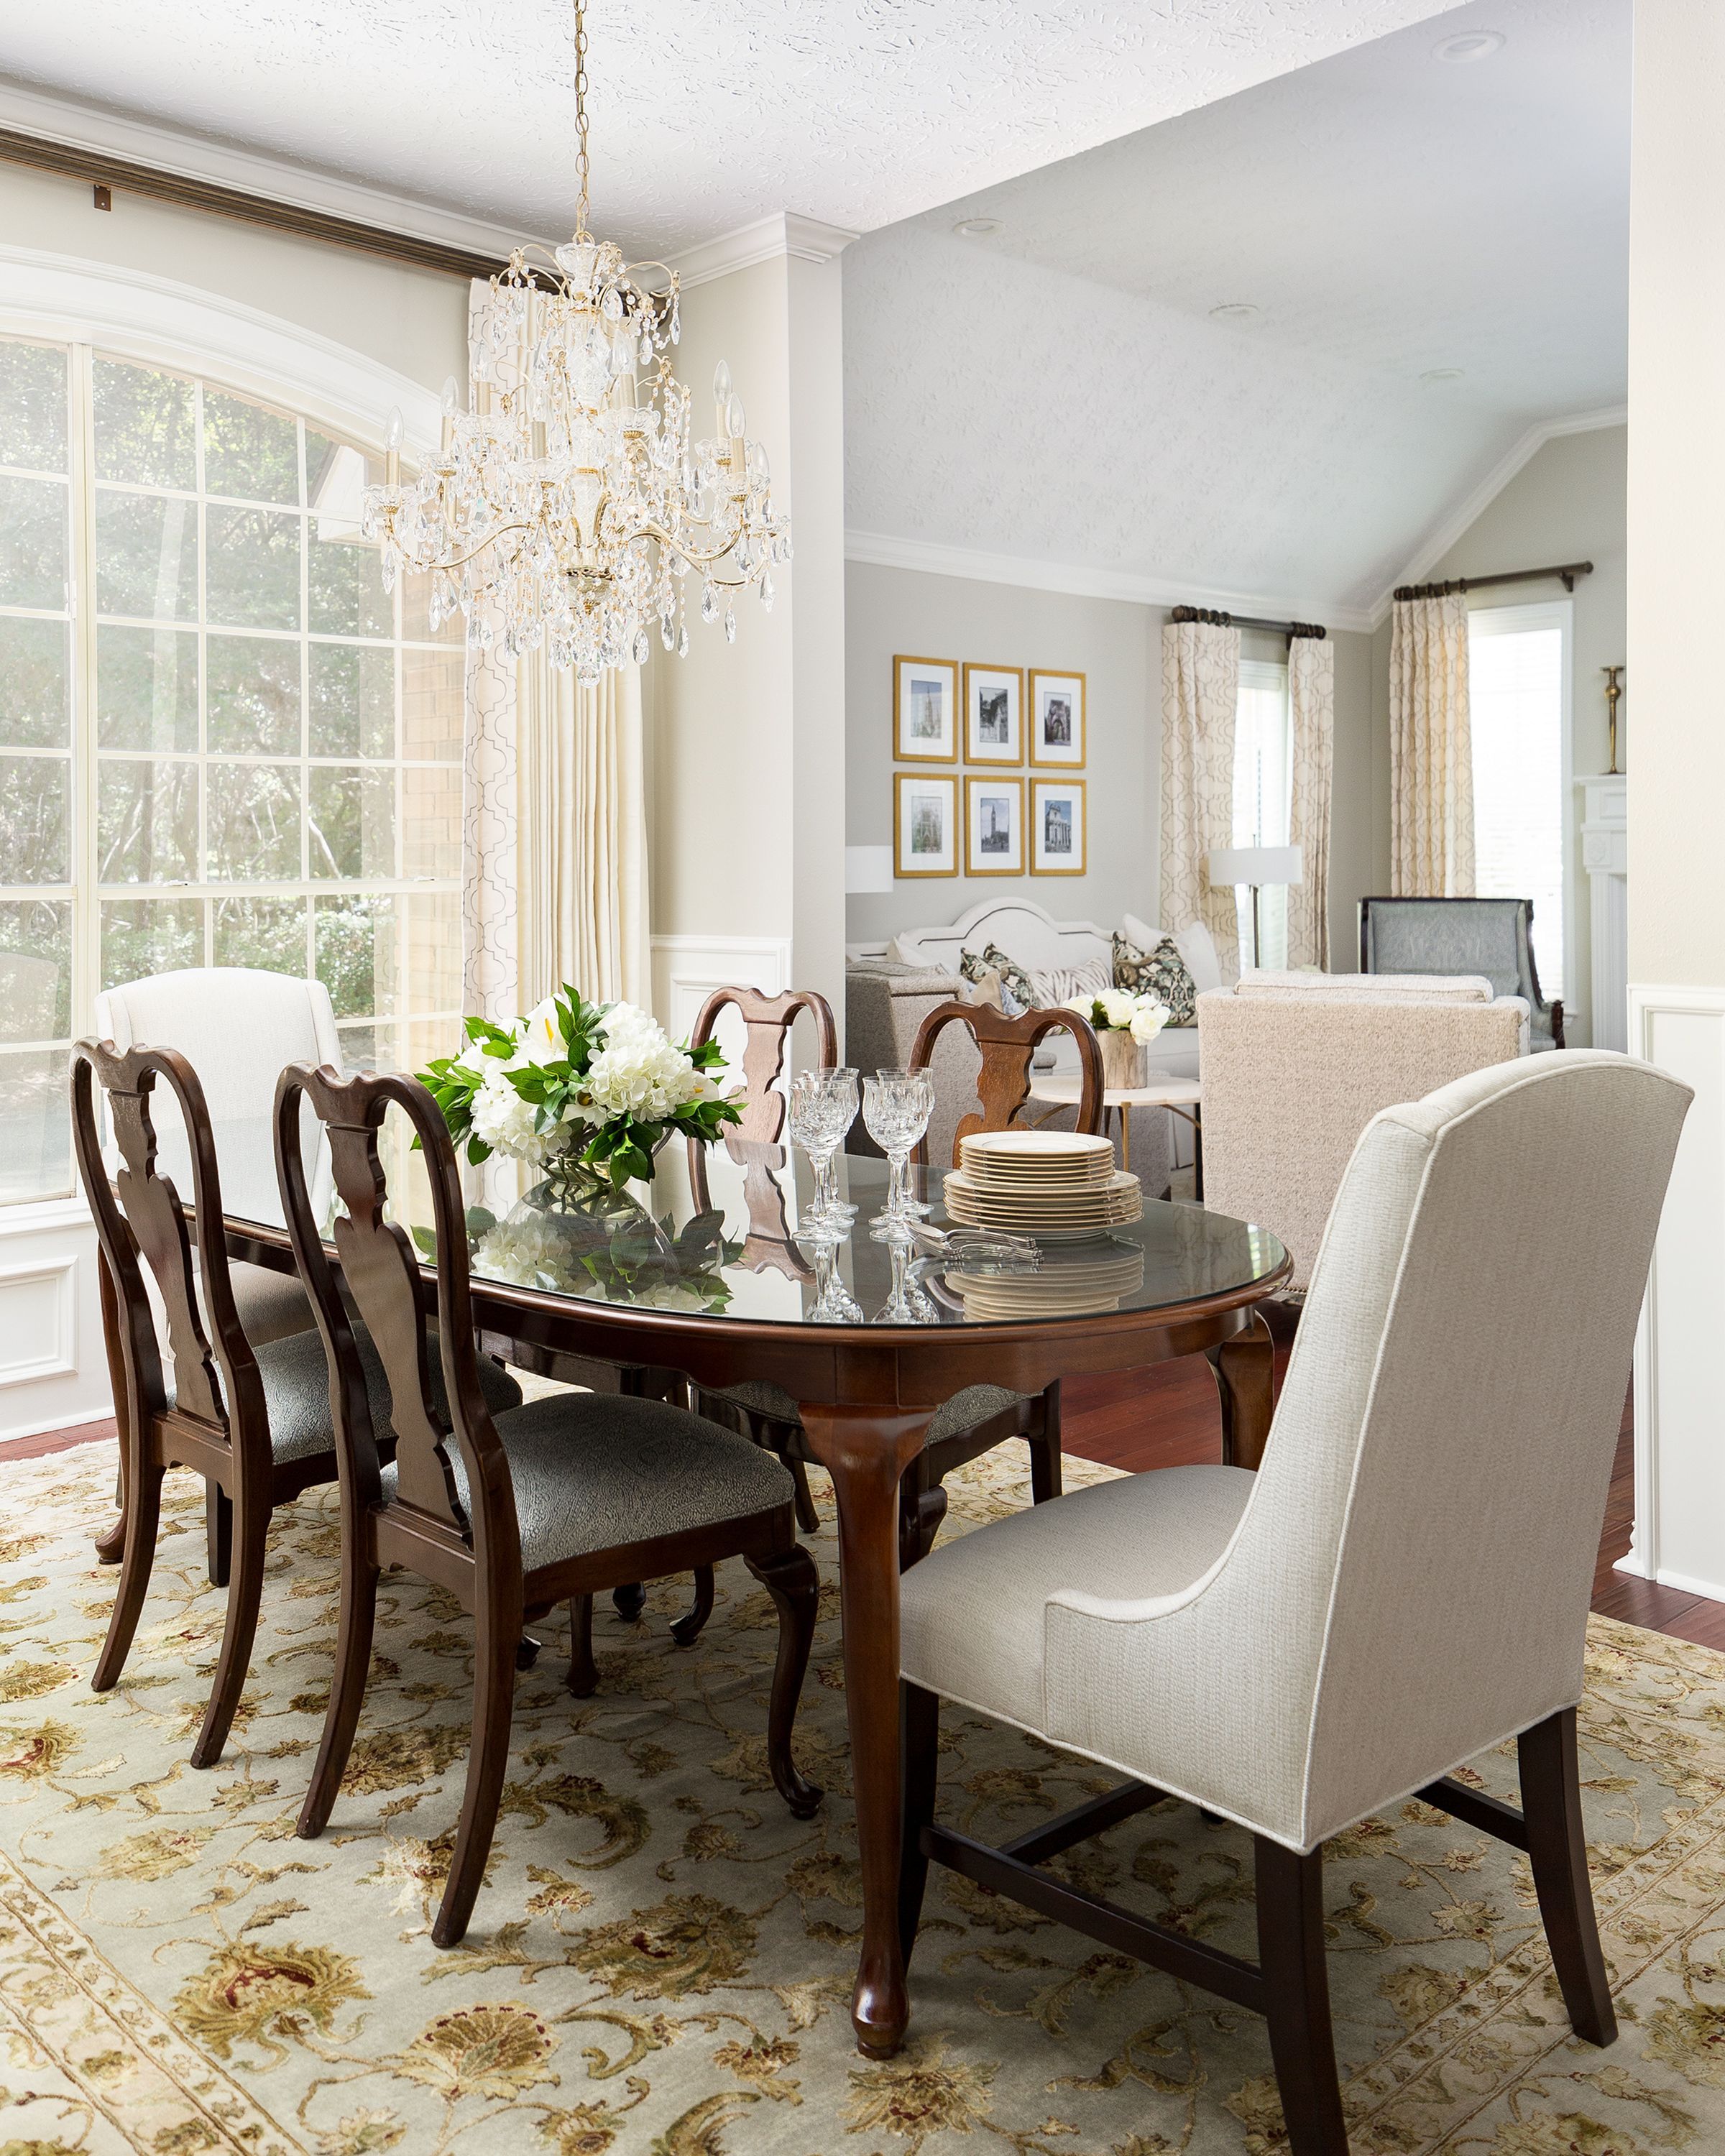 Dining Room Interior Design: A Touch Of Luxury